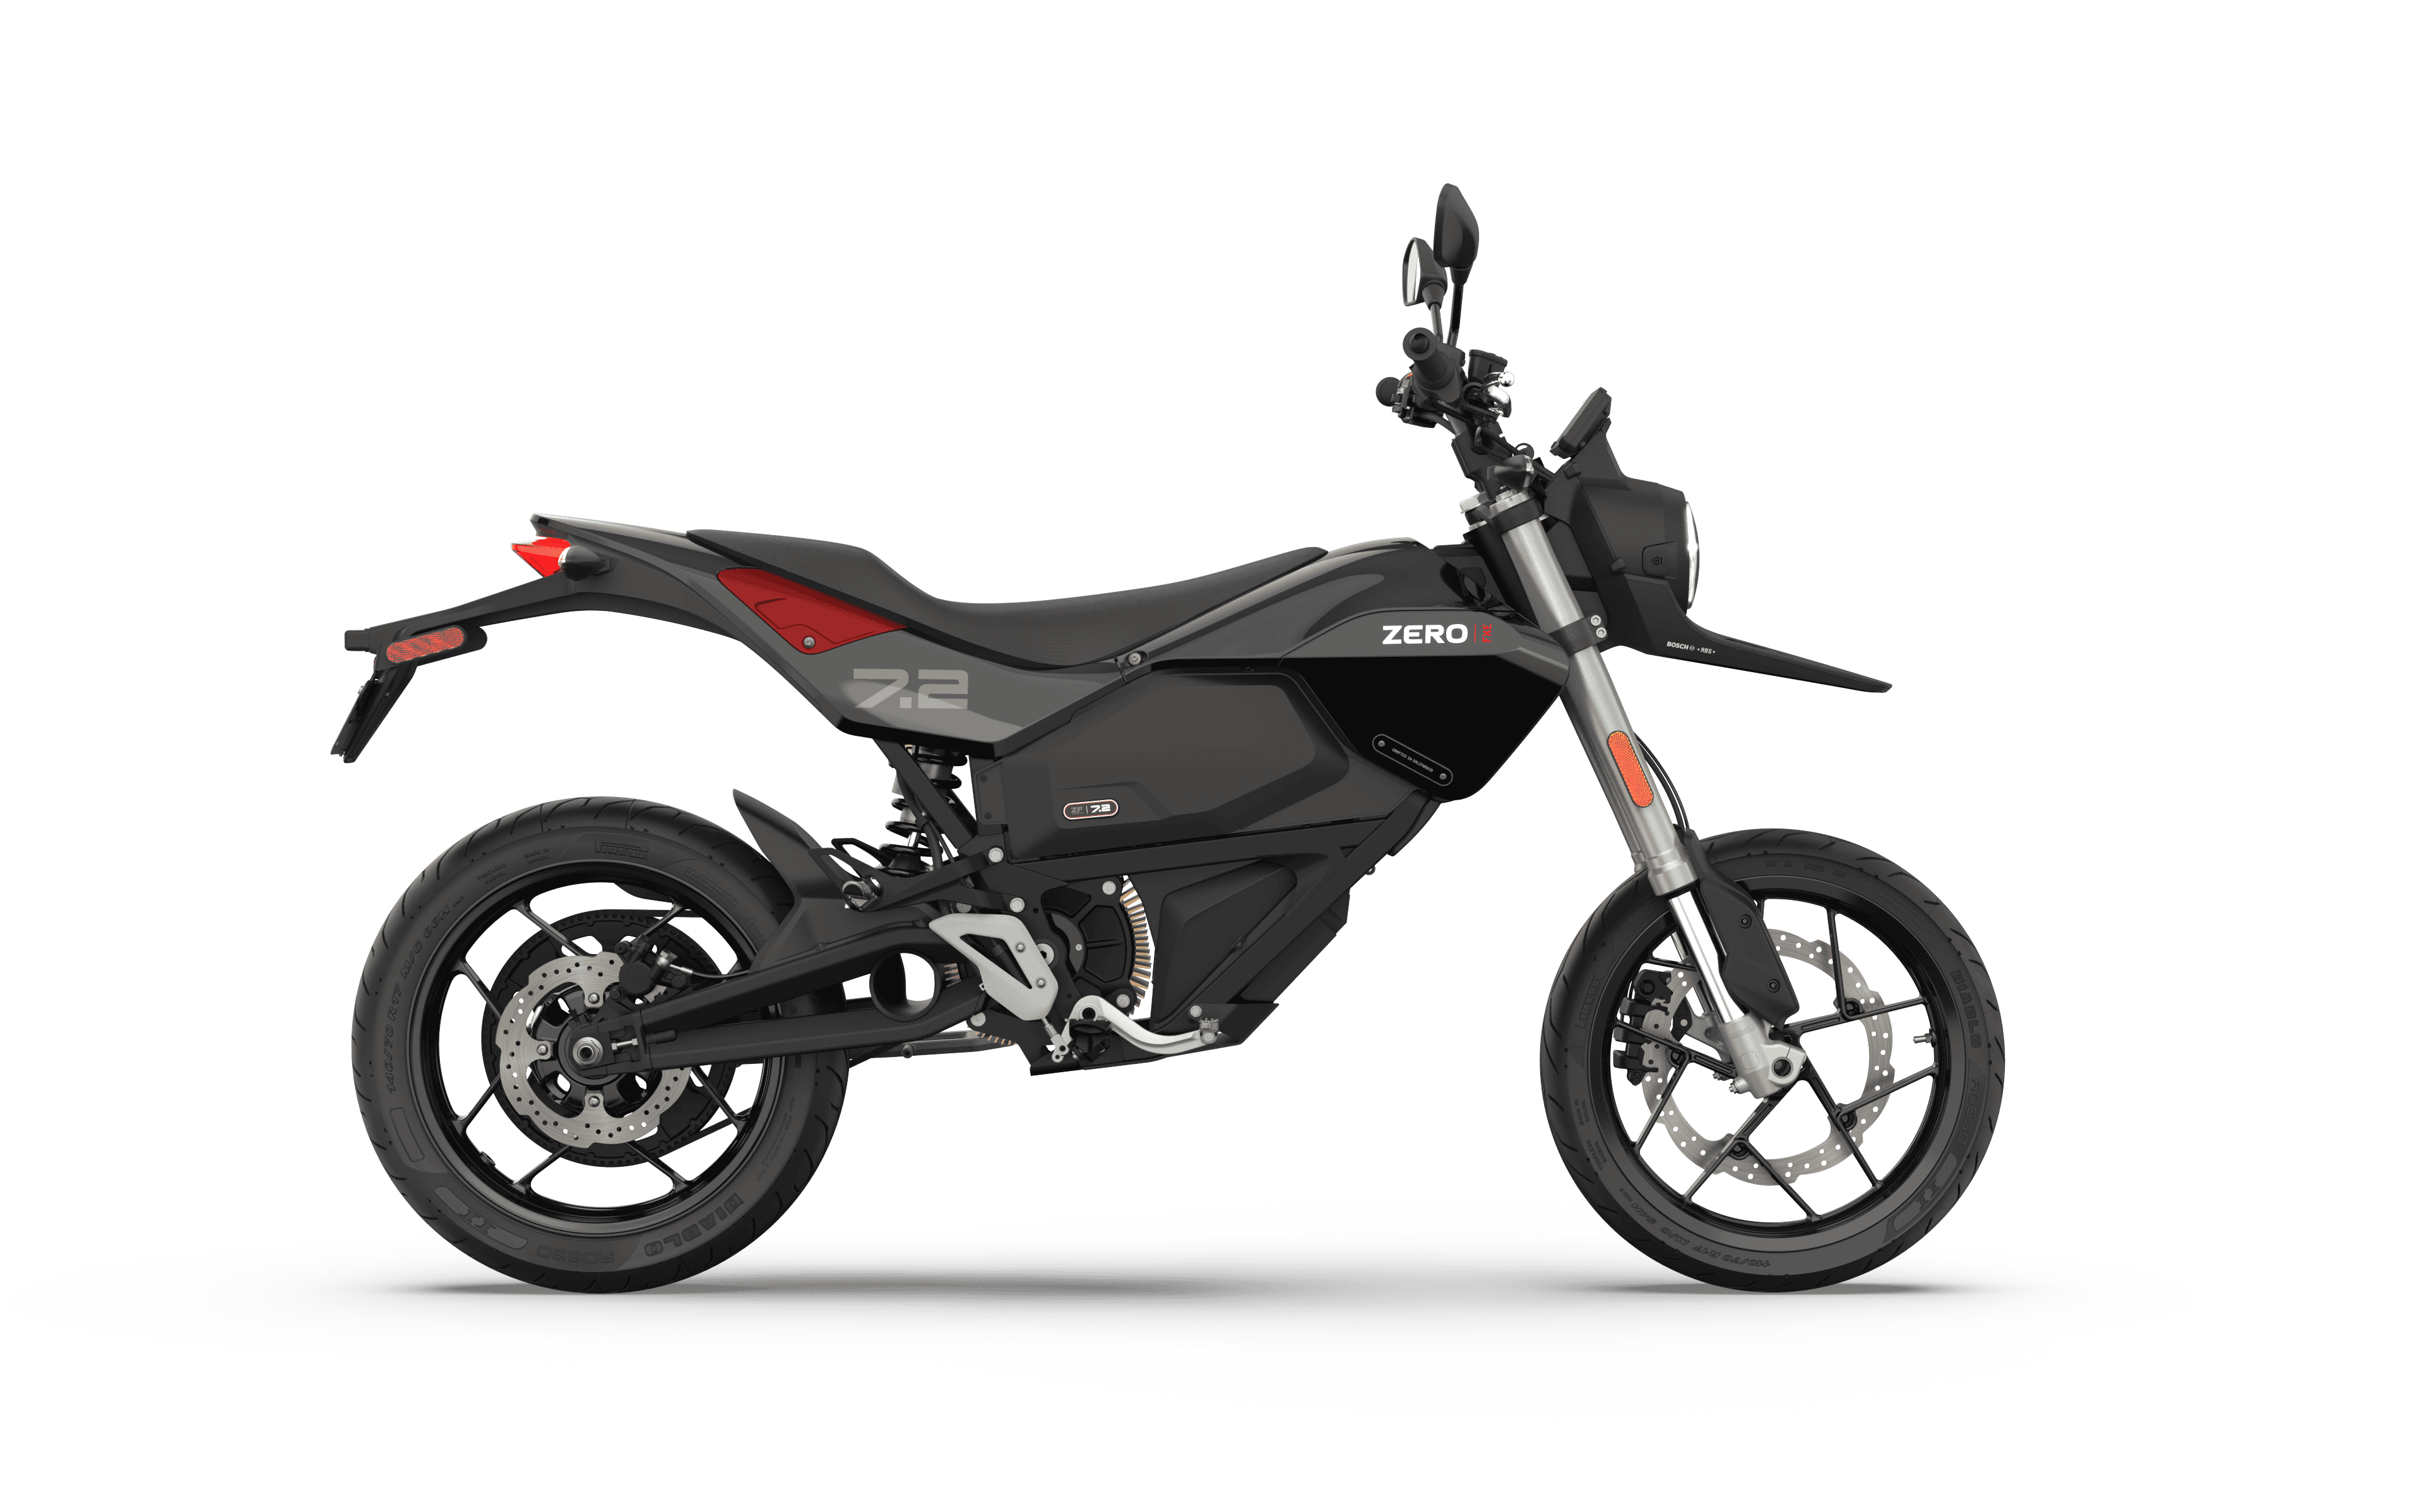 https://e-vehicleinfo.com/global/zero-fxe-electric-motorcycle-price-range-and-specifications/